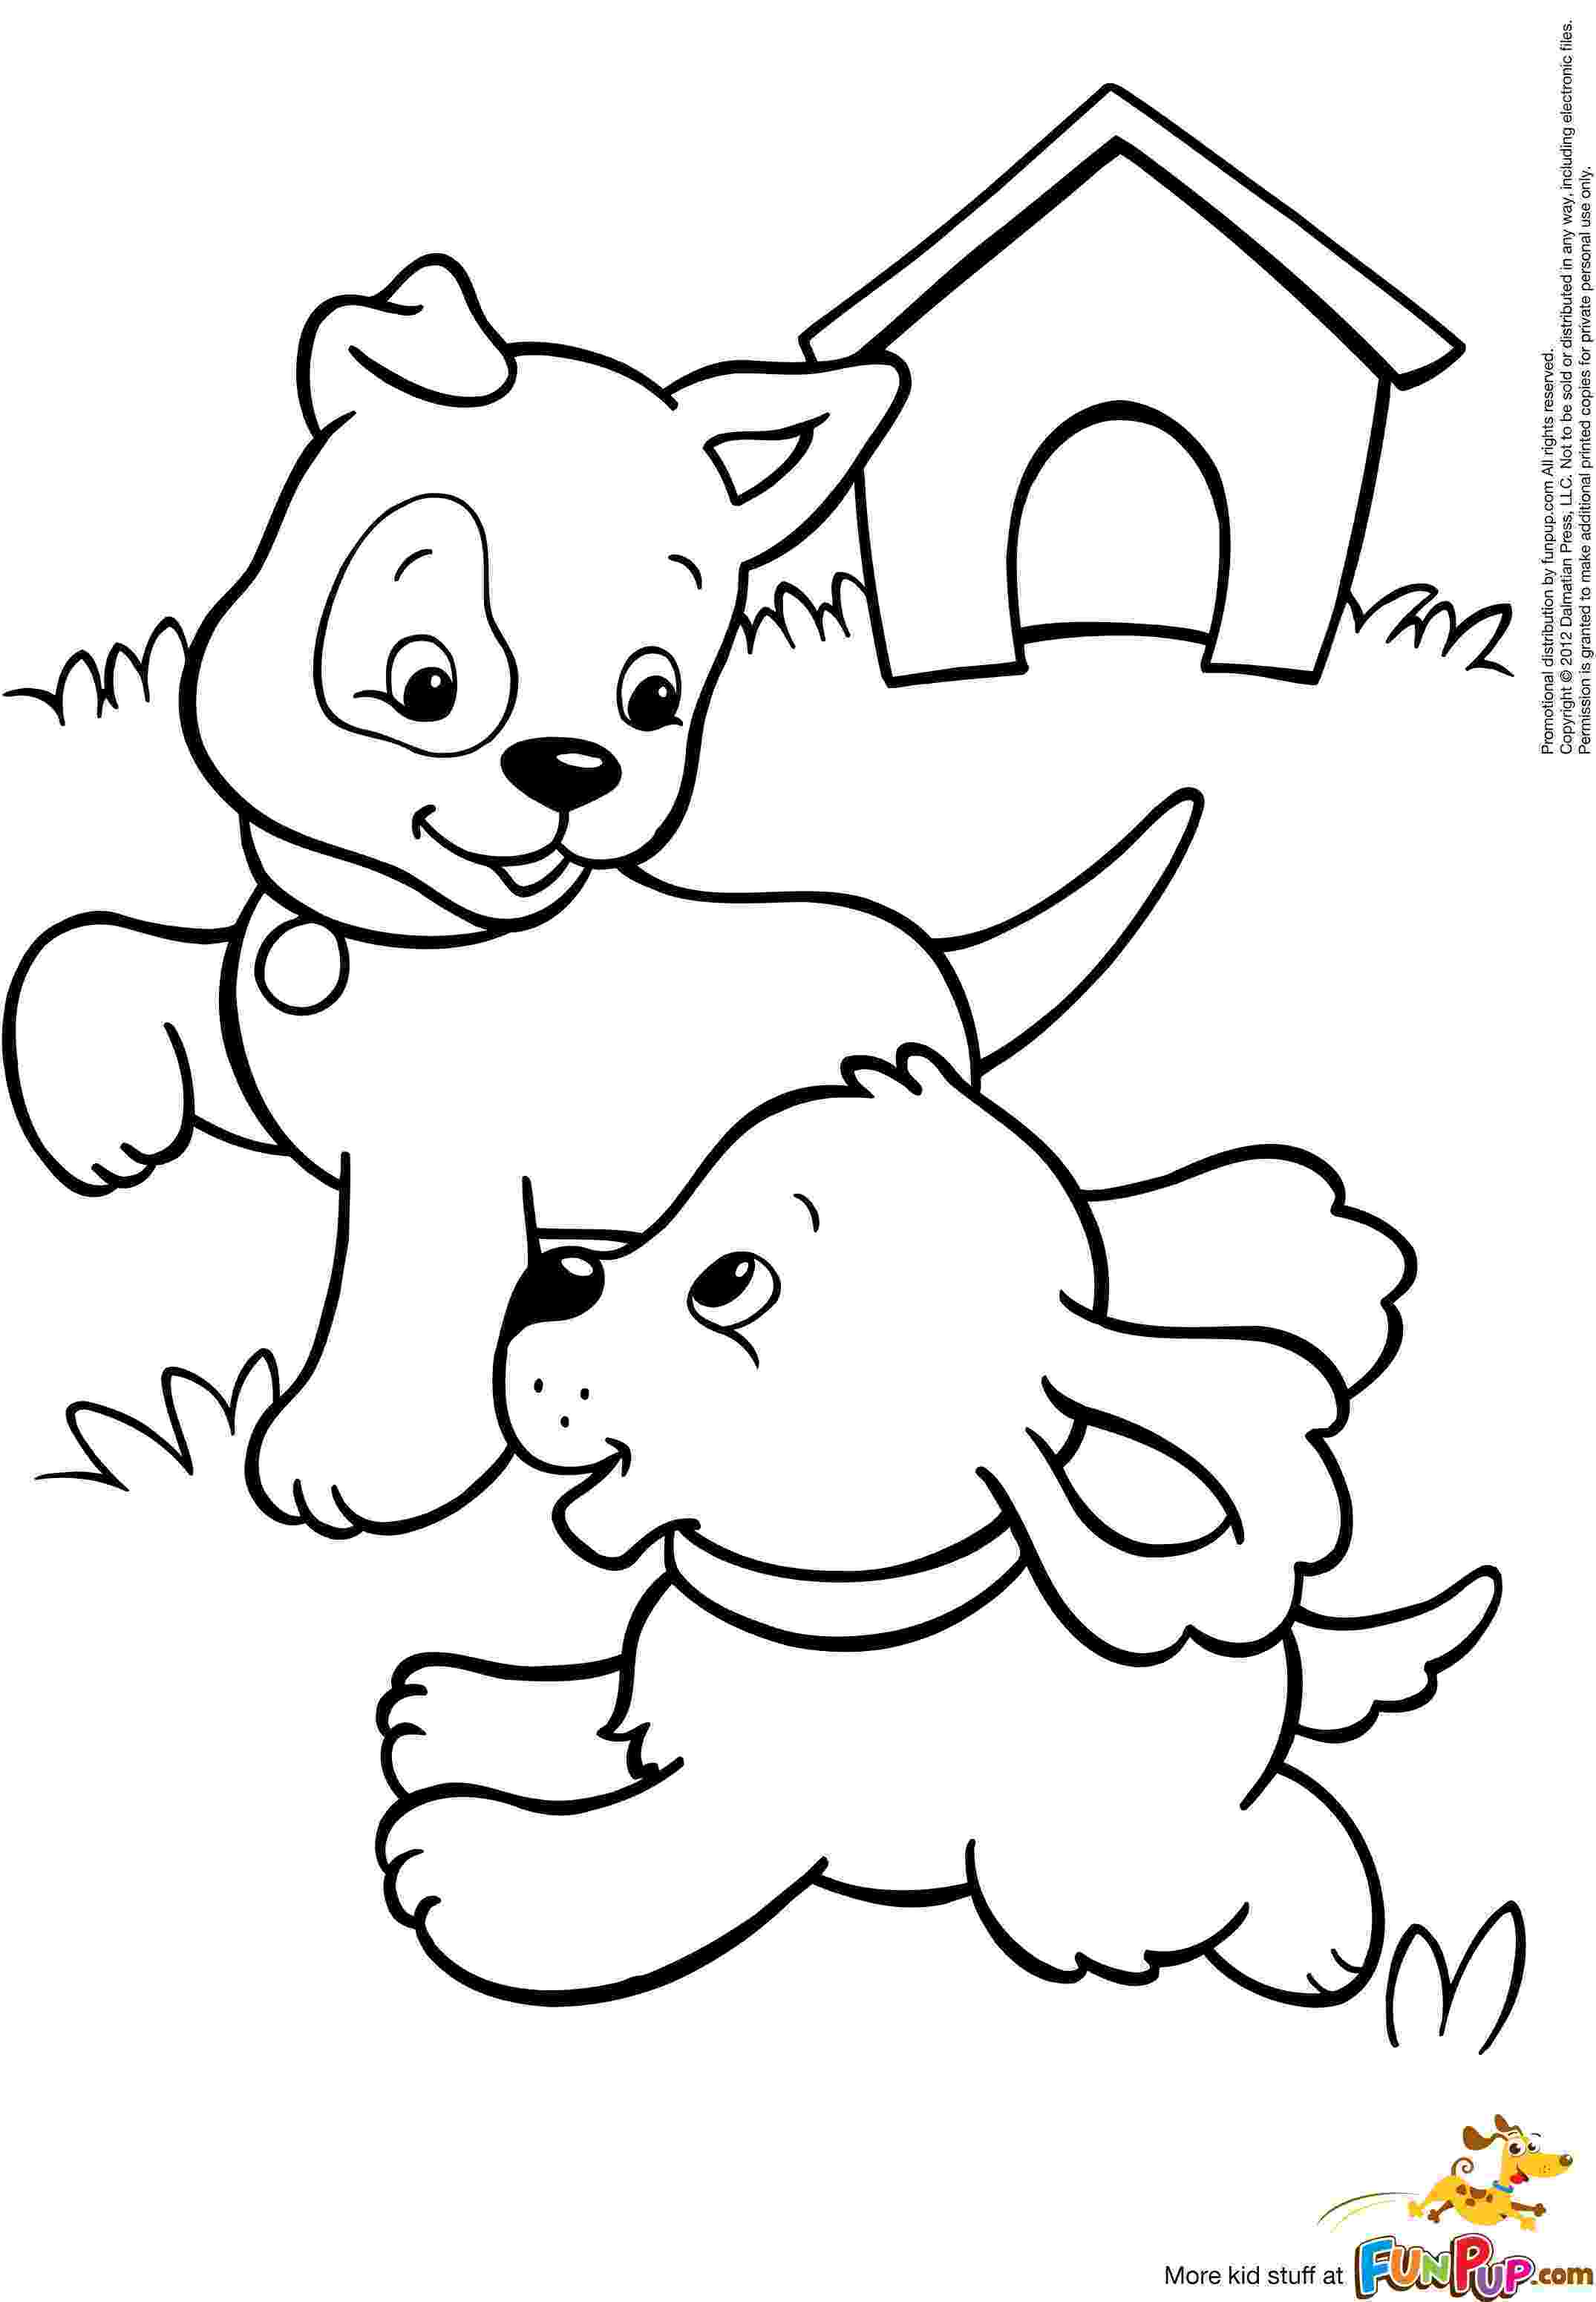 dogs coloring page dog coloring pages 2018 dr odd coloring dogs page 